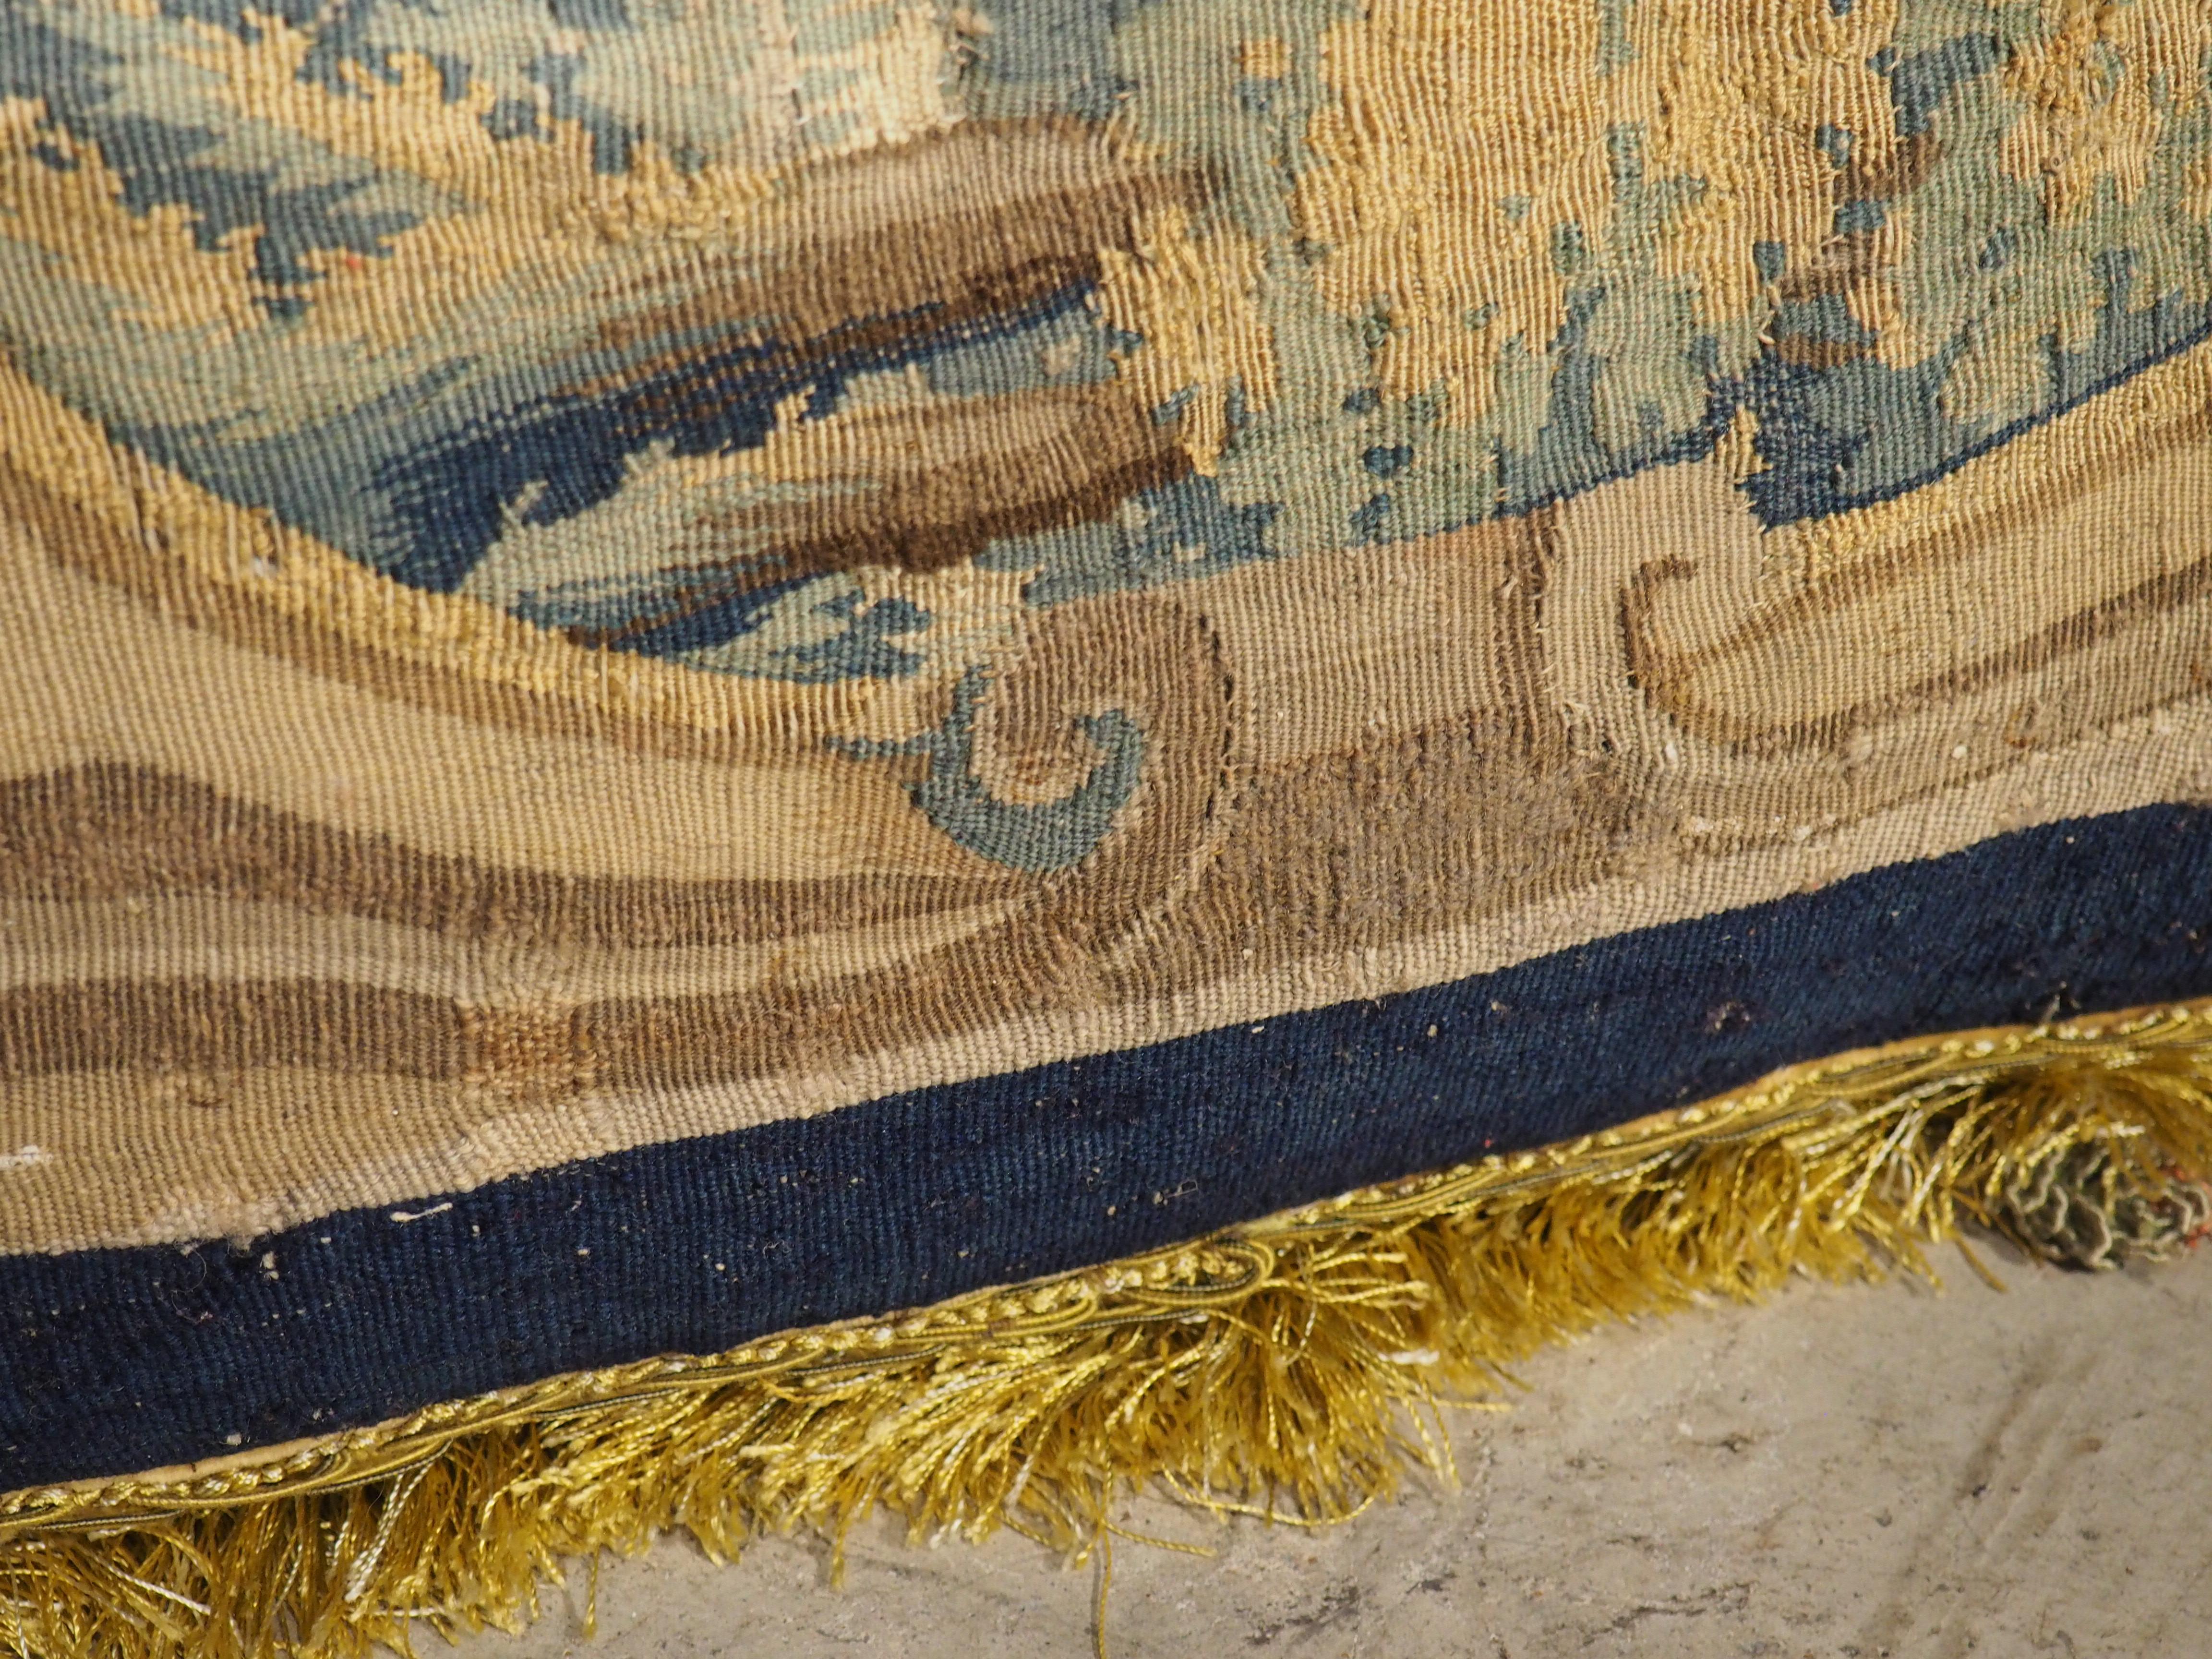 Two Tapestry Pillows from 17th Century Audenarde Fragments 1